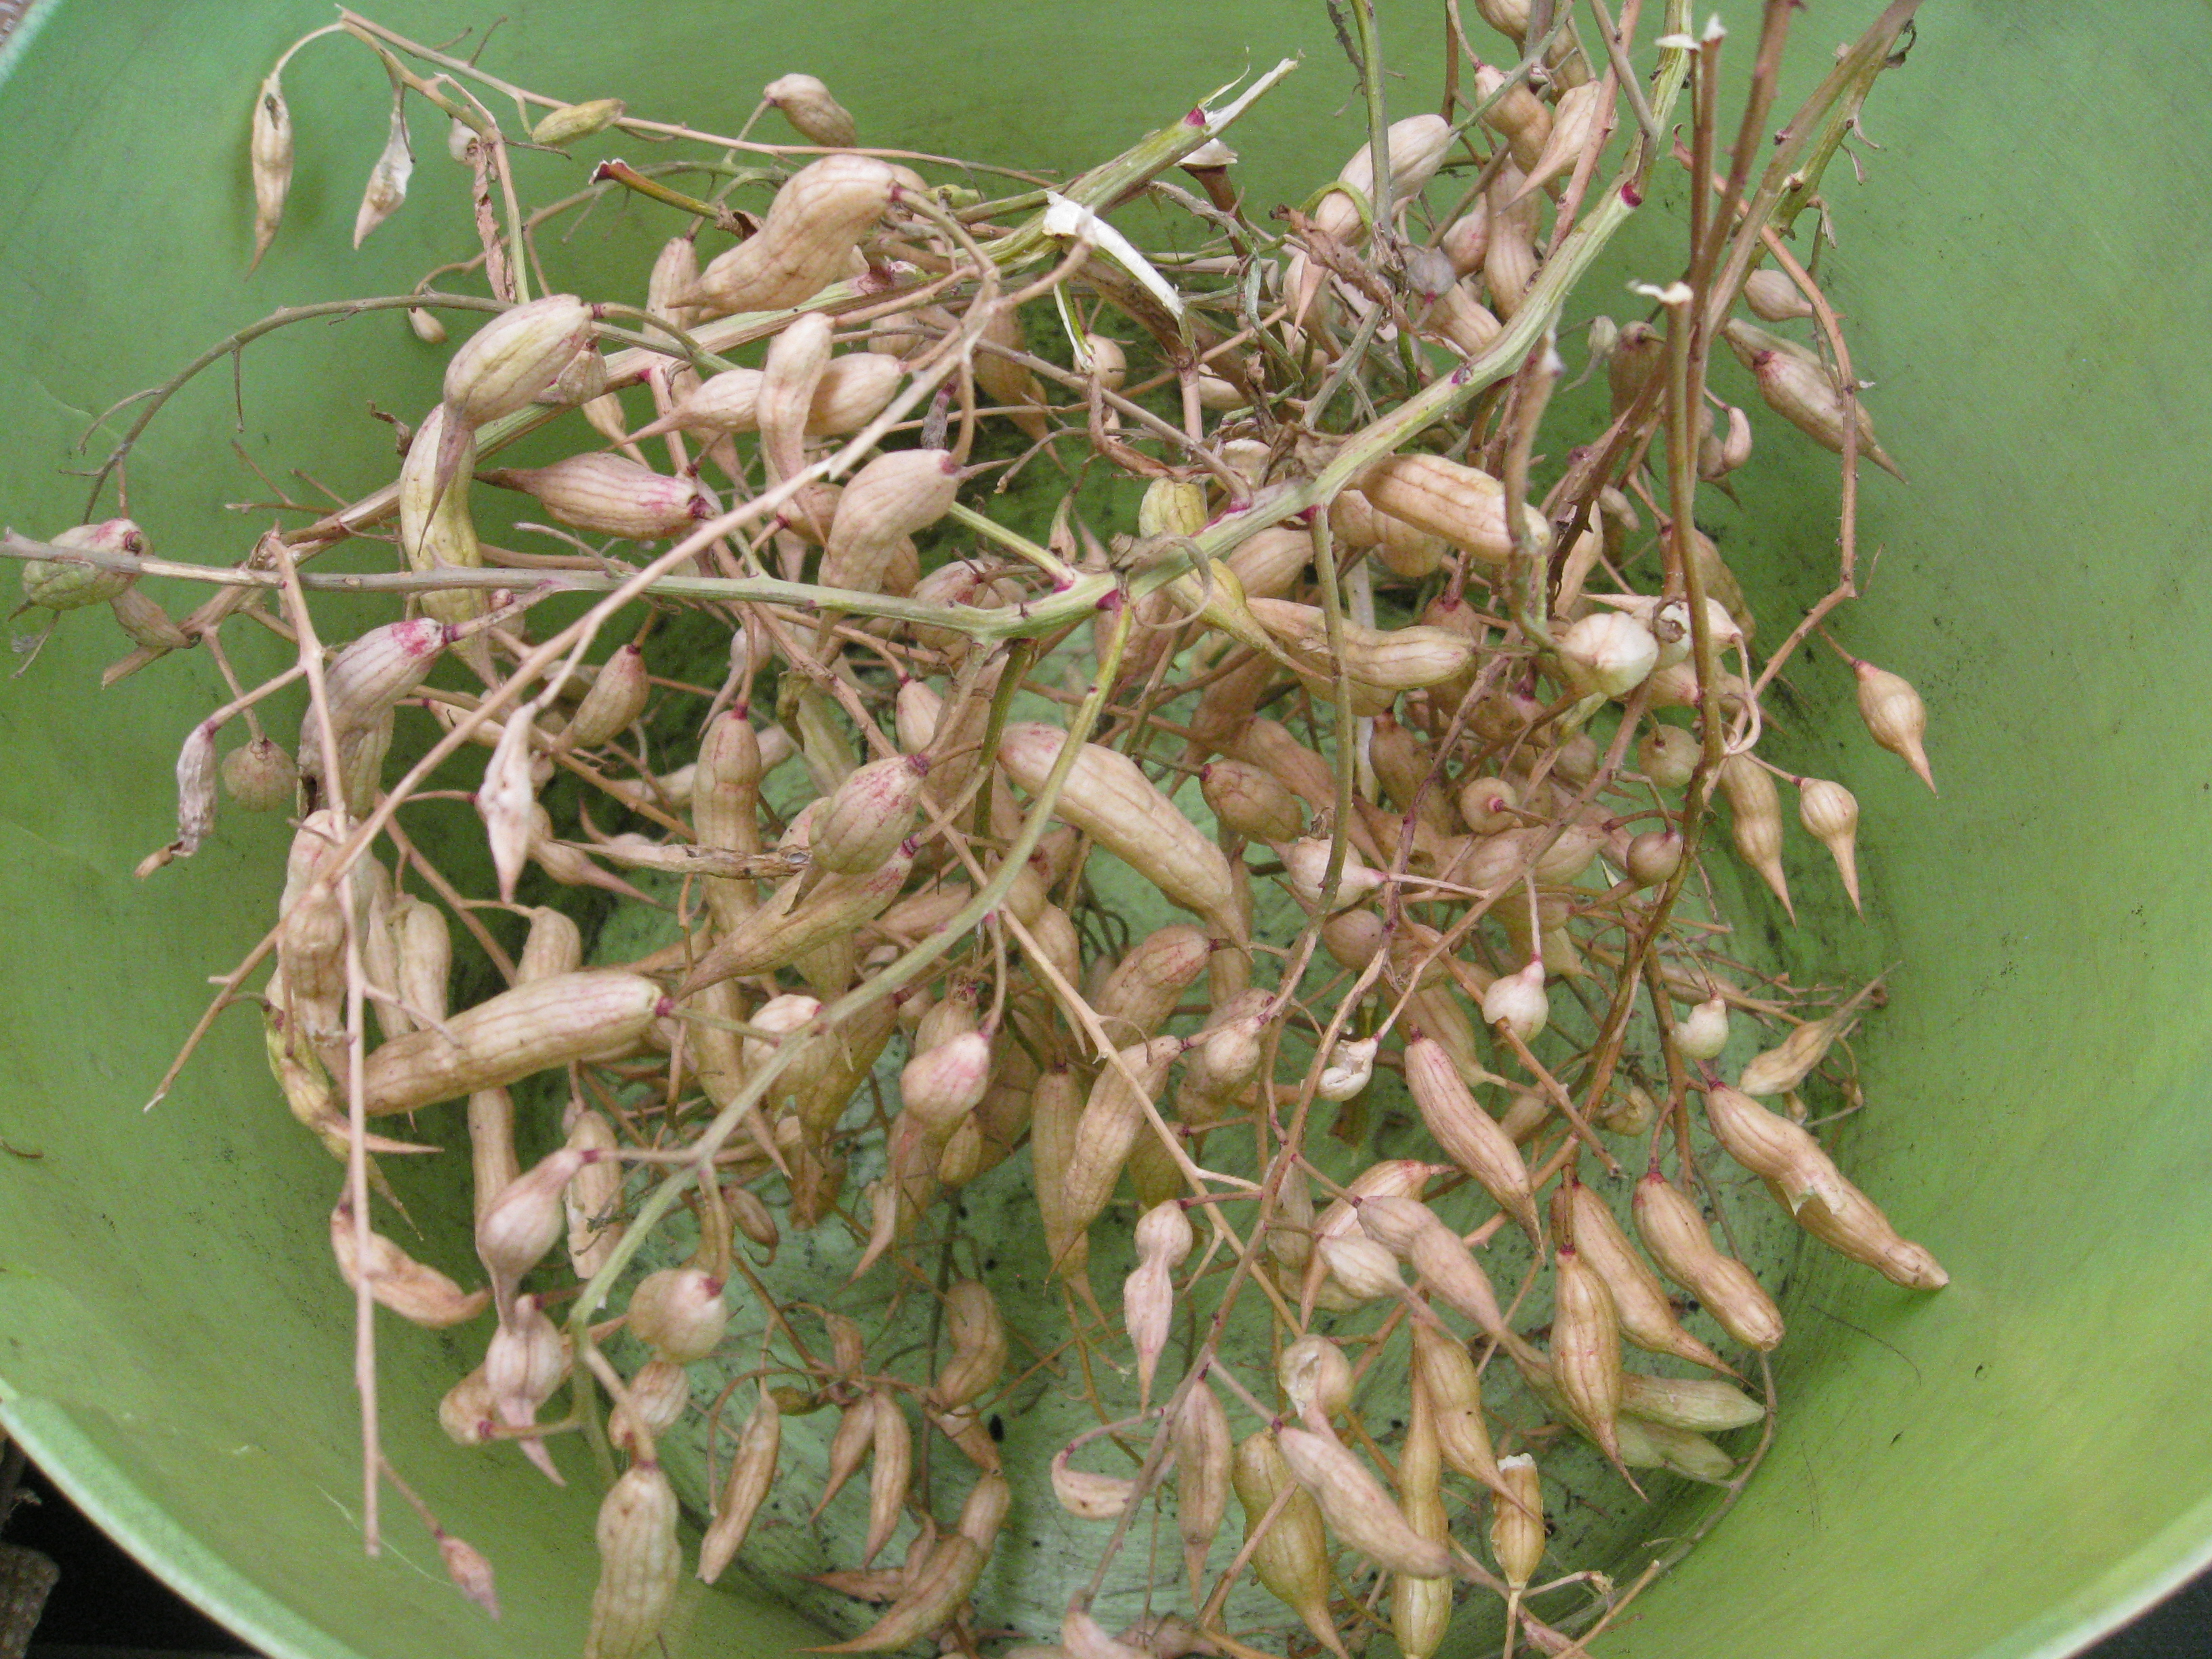 Radish seed pods are dried and crispy